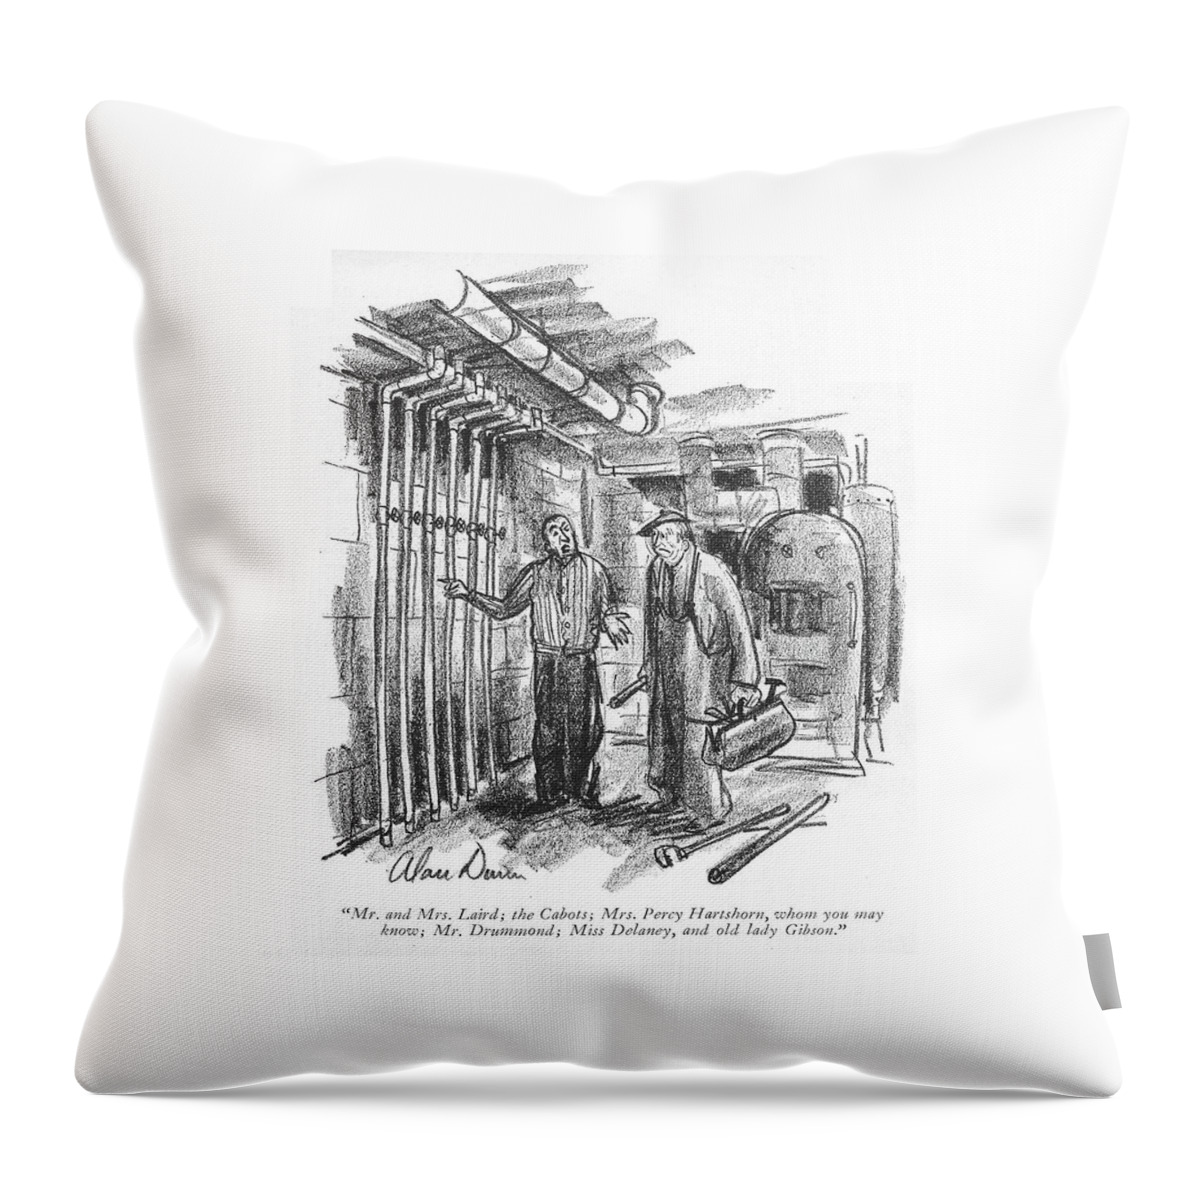 Mr. And Mrs. Laird Throw Pillow